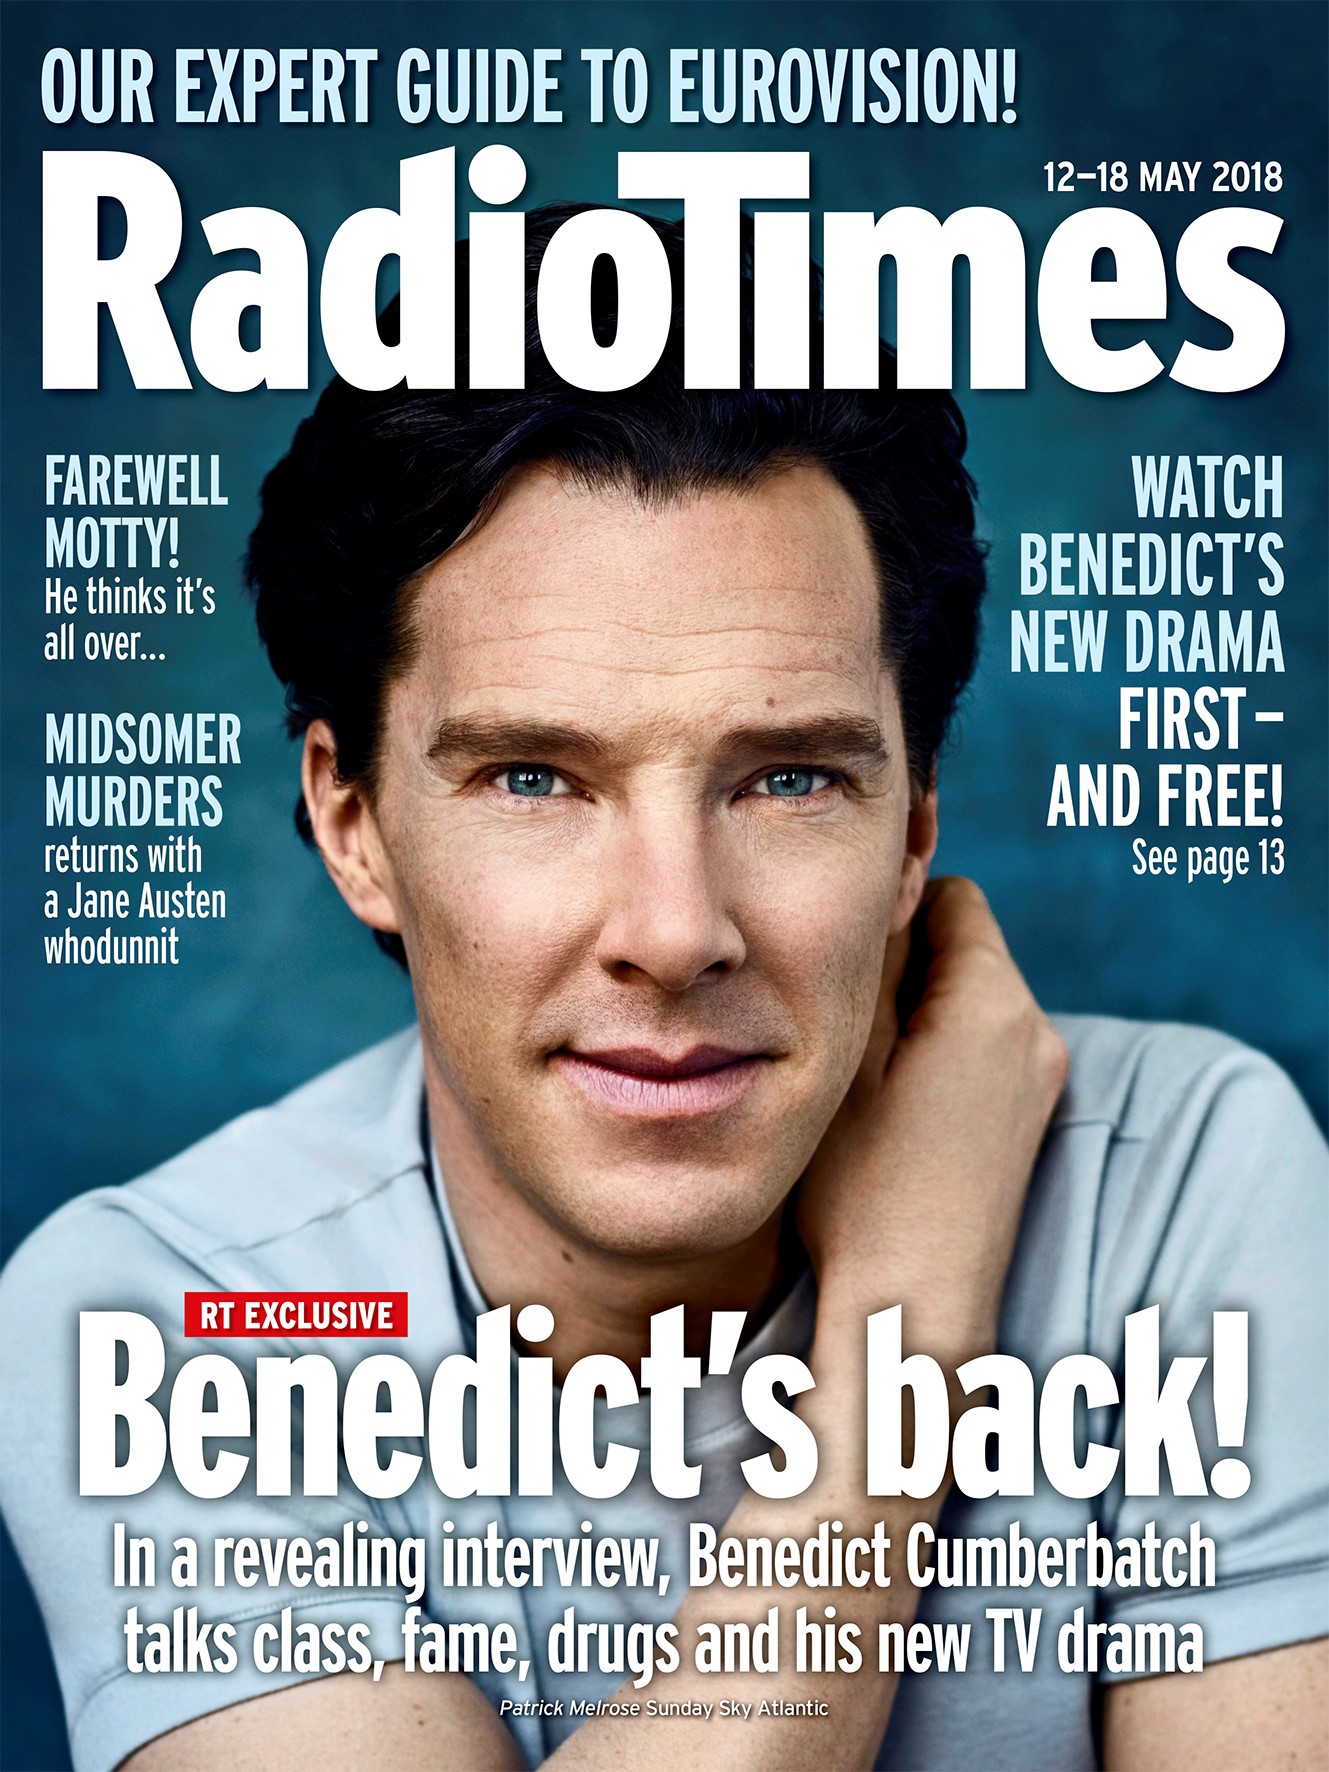 The cover of Radio Times (Radio Times)